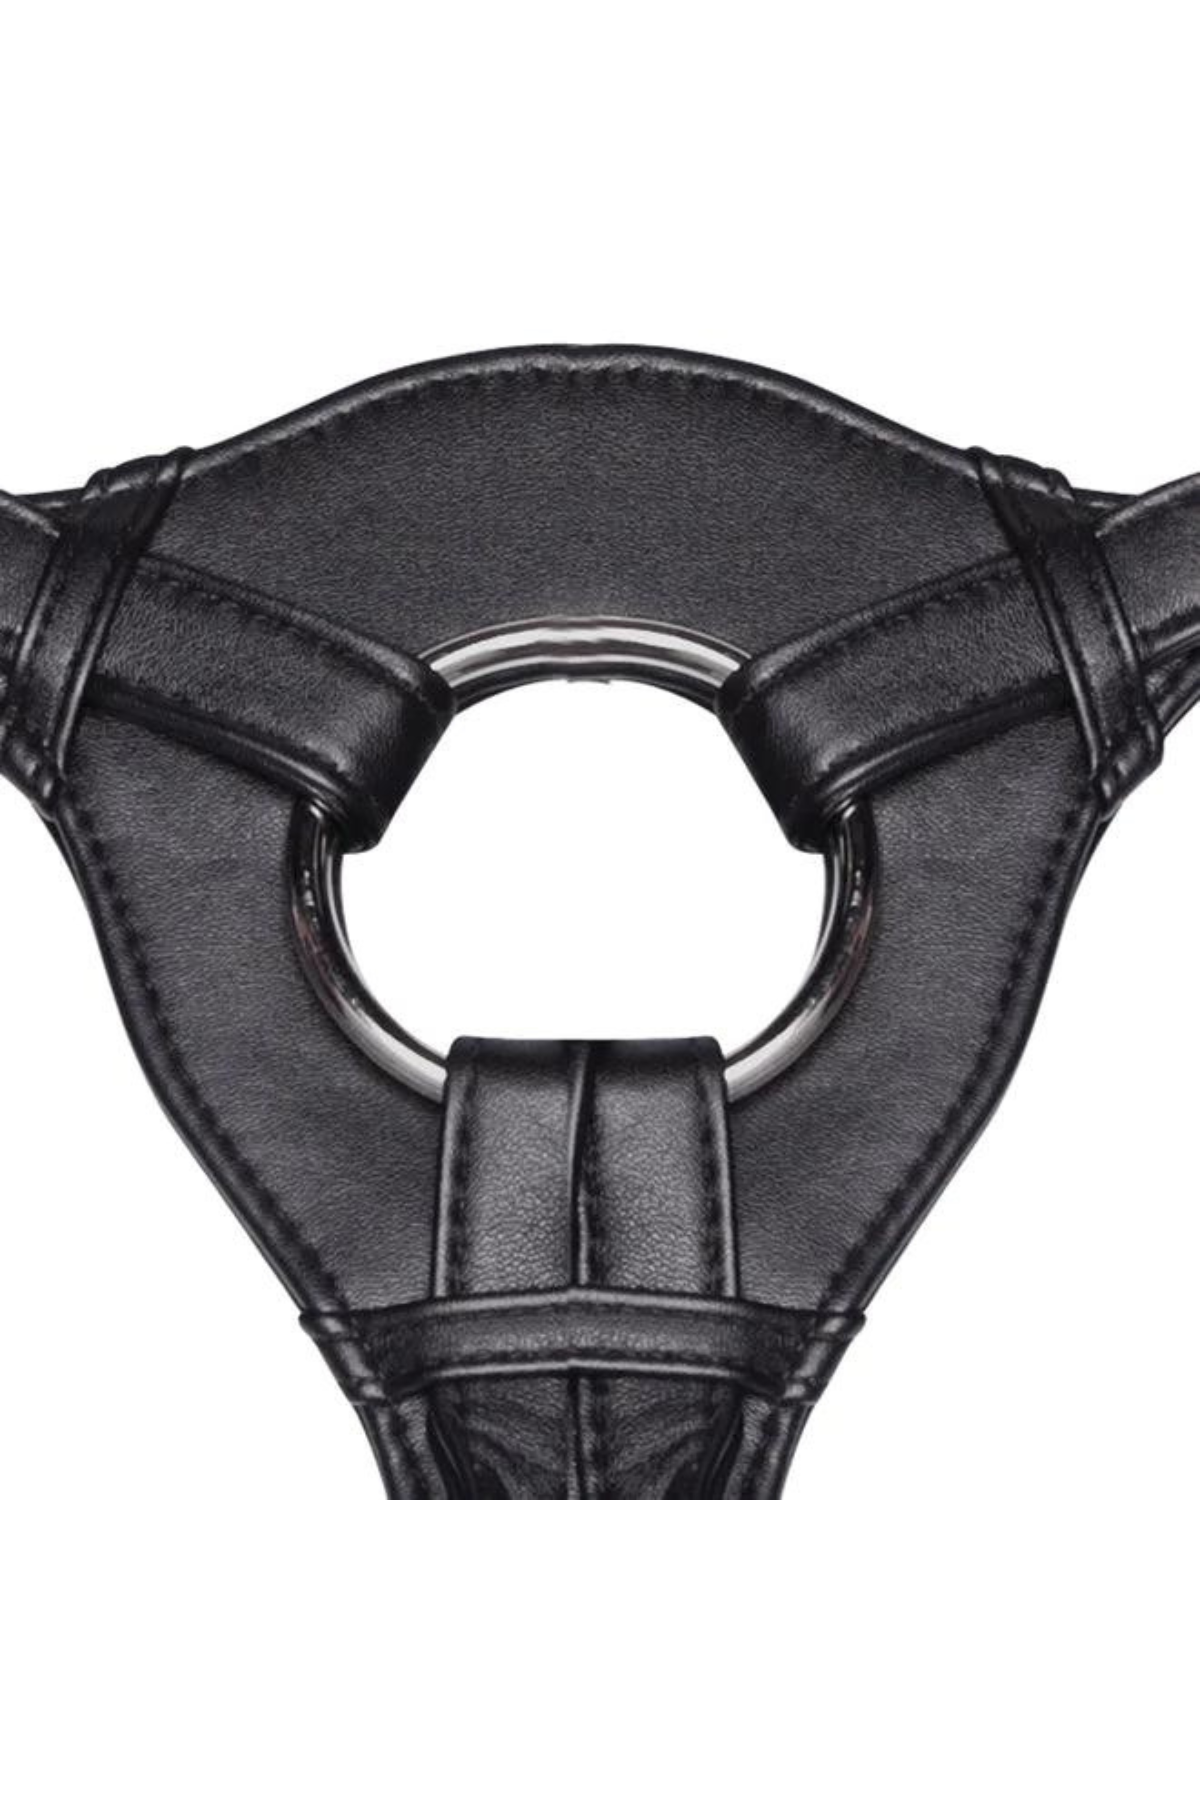 Patent Leather Strap-On Harness